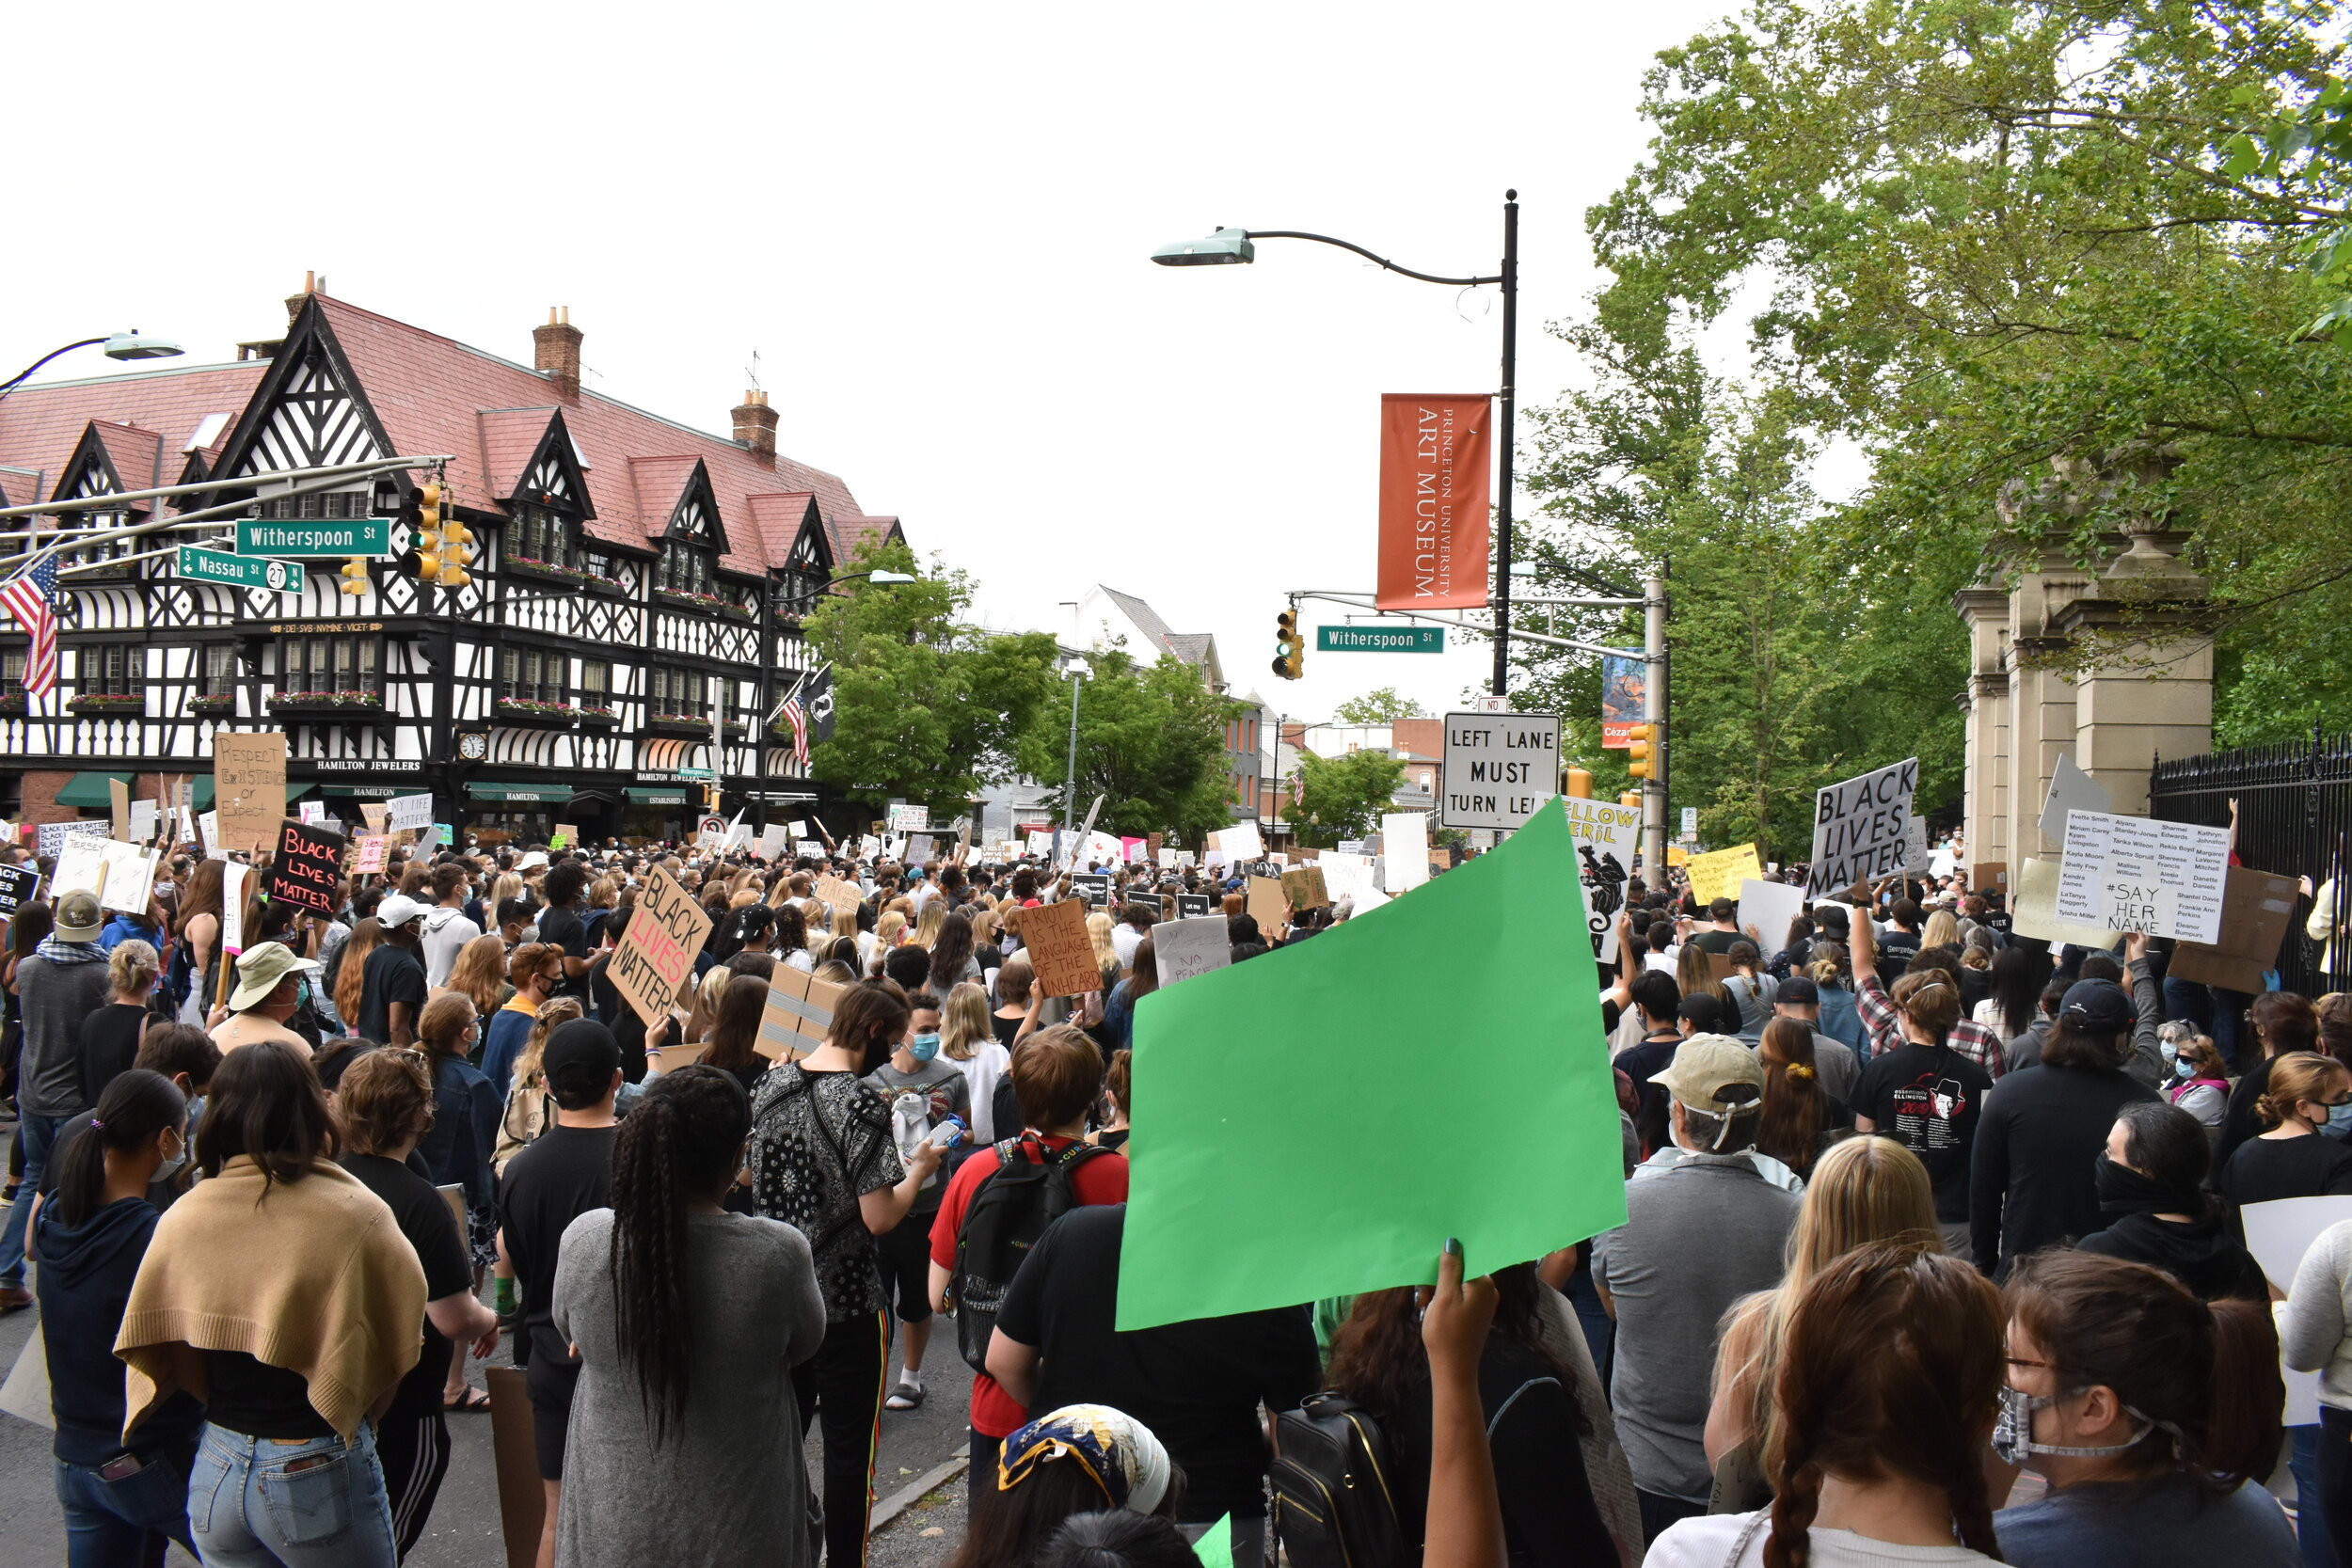  A large crowd of protestors walked down Nassau Street in Princeton, New Jersey during a protest on Tuesday, June 2, 2020.  Photo by: Madison Mento  